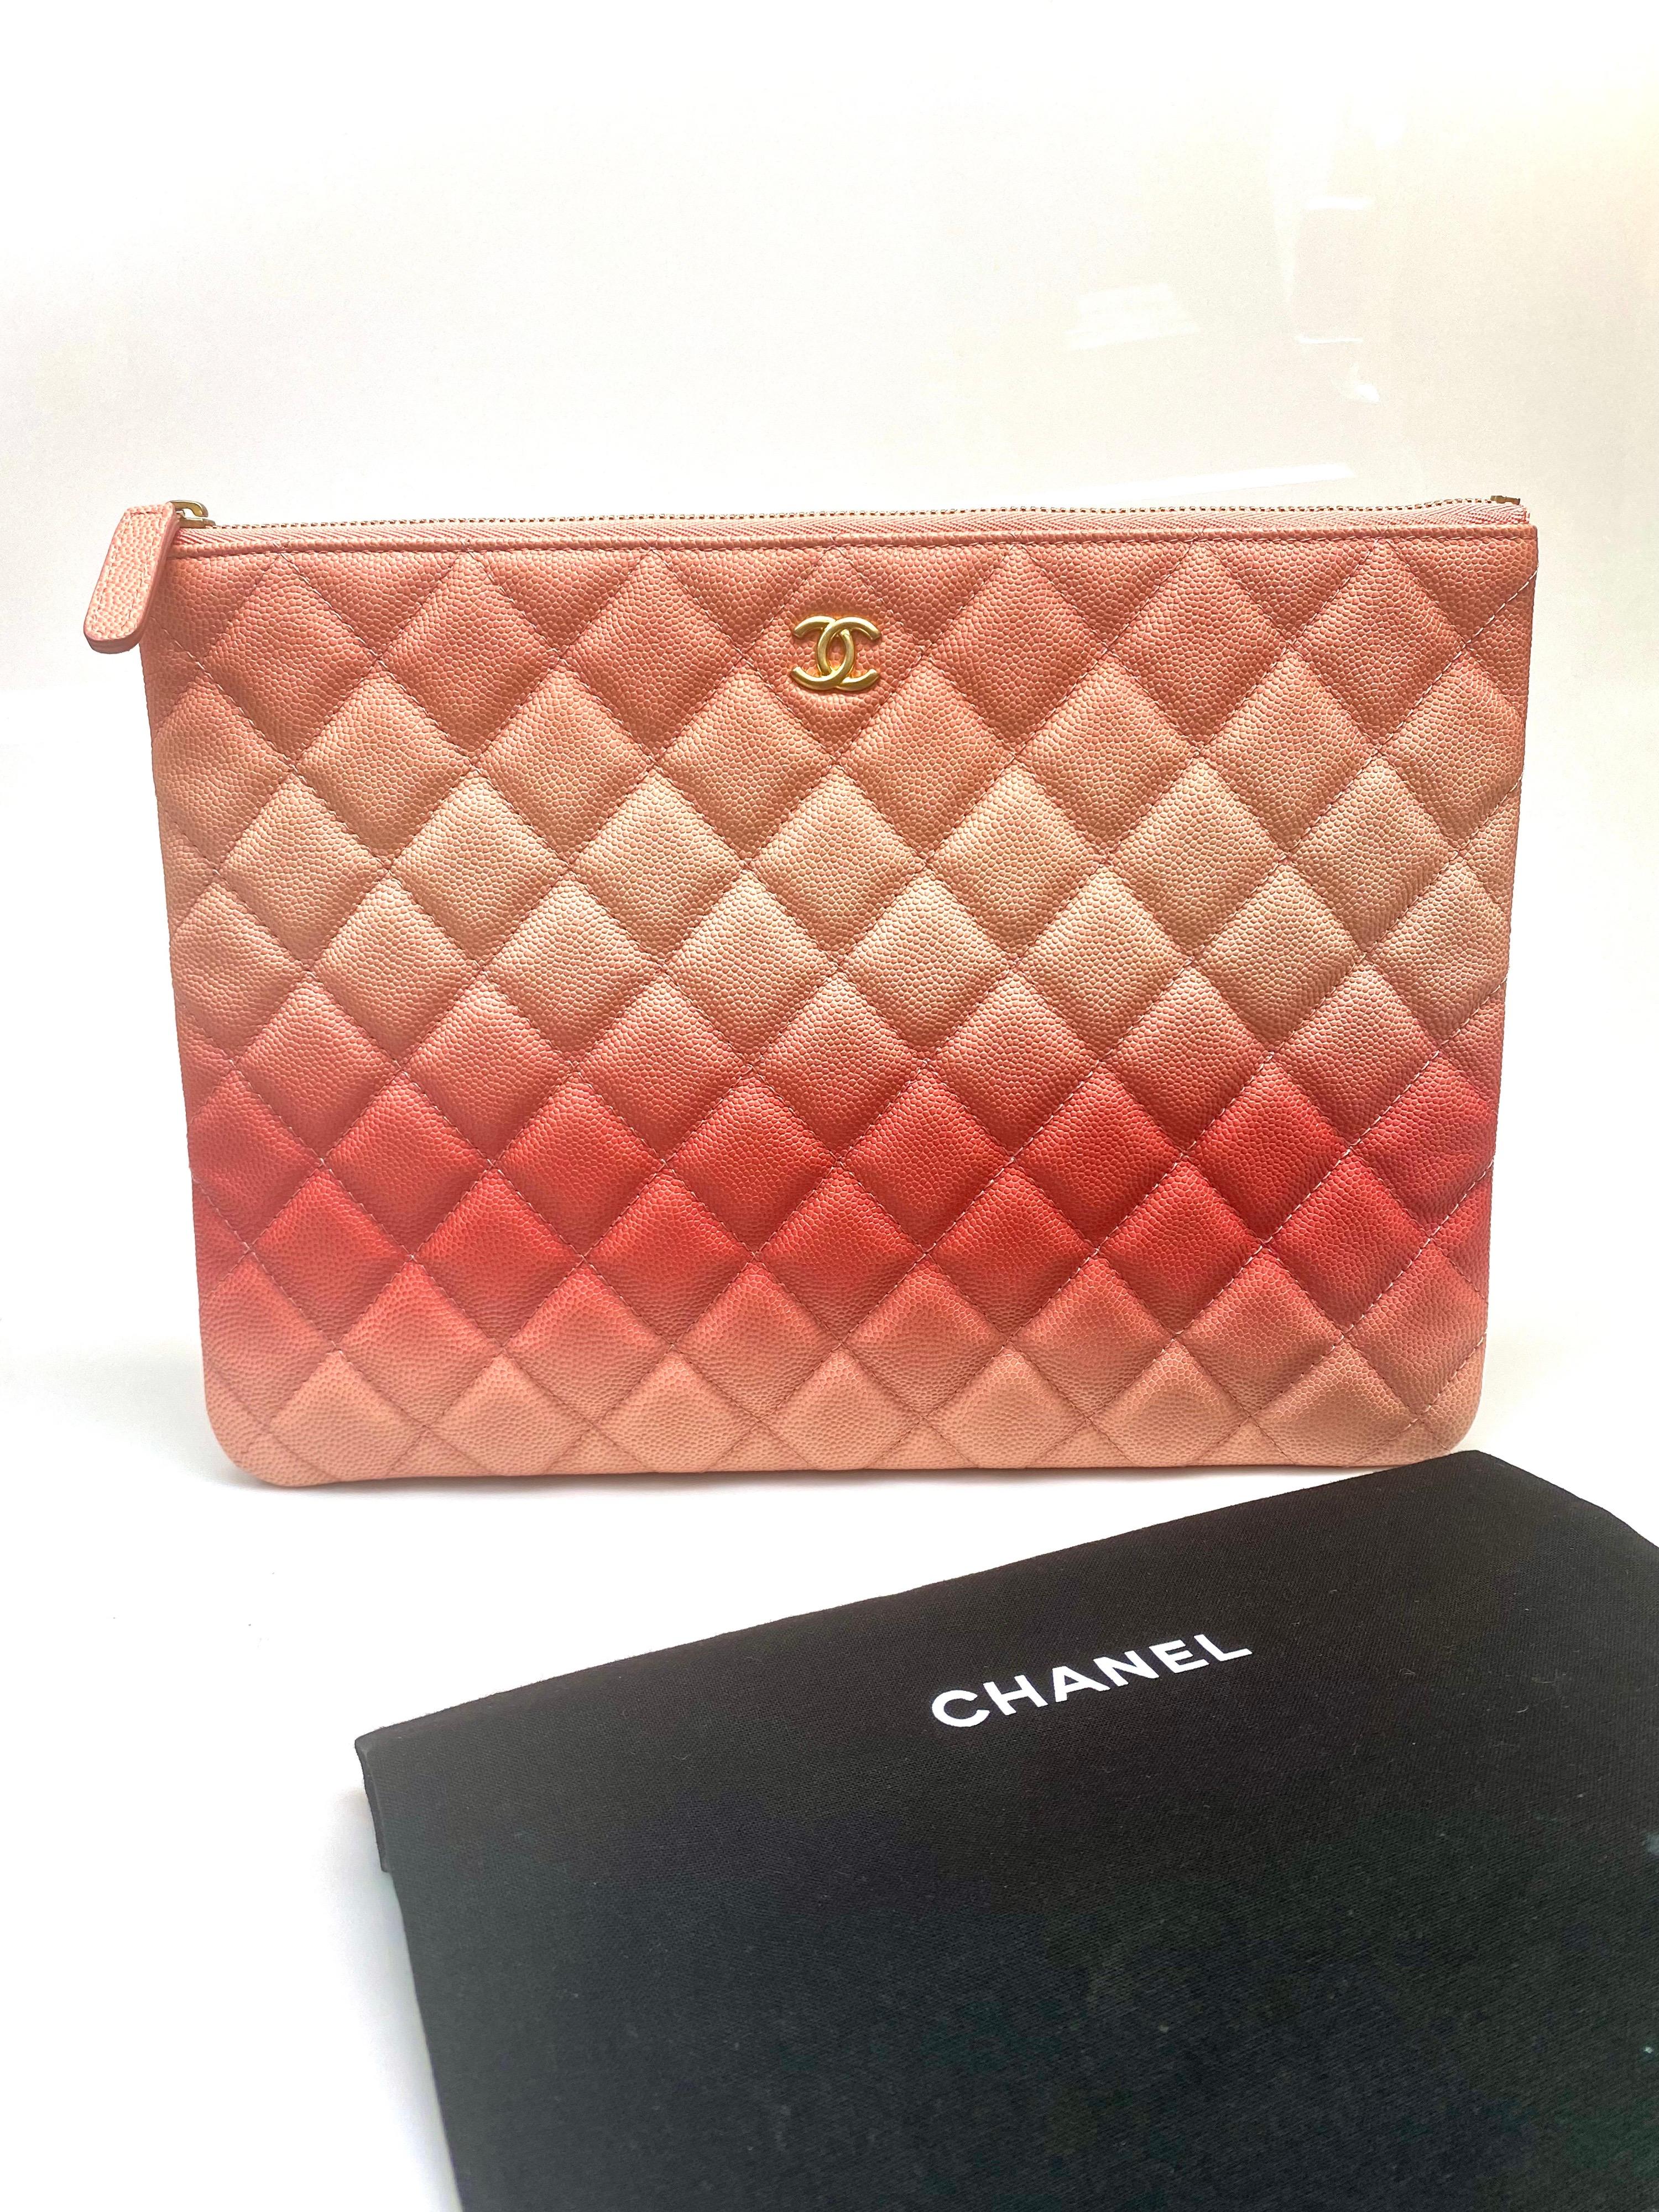 Women's Chanel Classic Quilted Ombre O-Case Clutch Bag